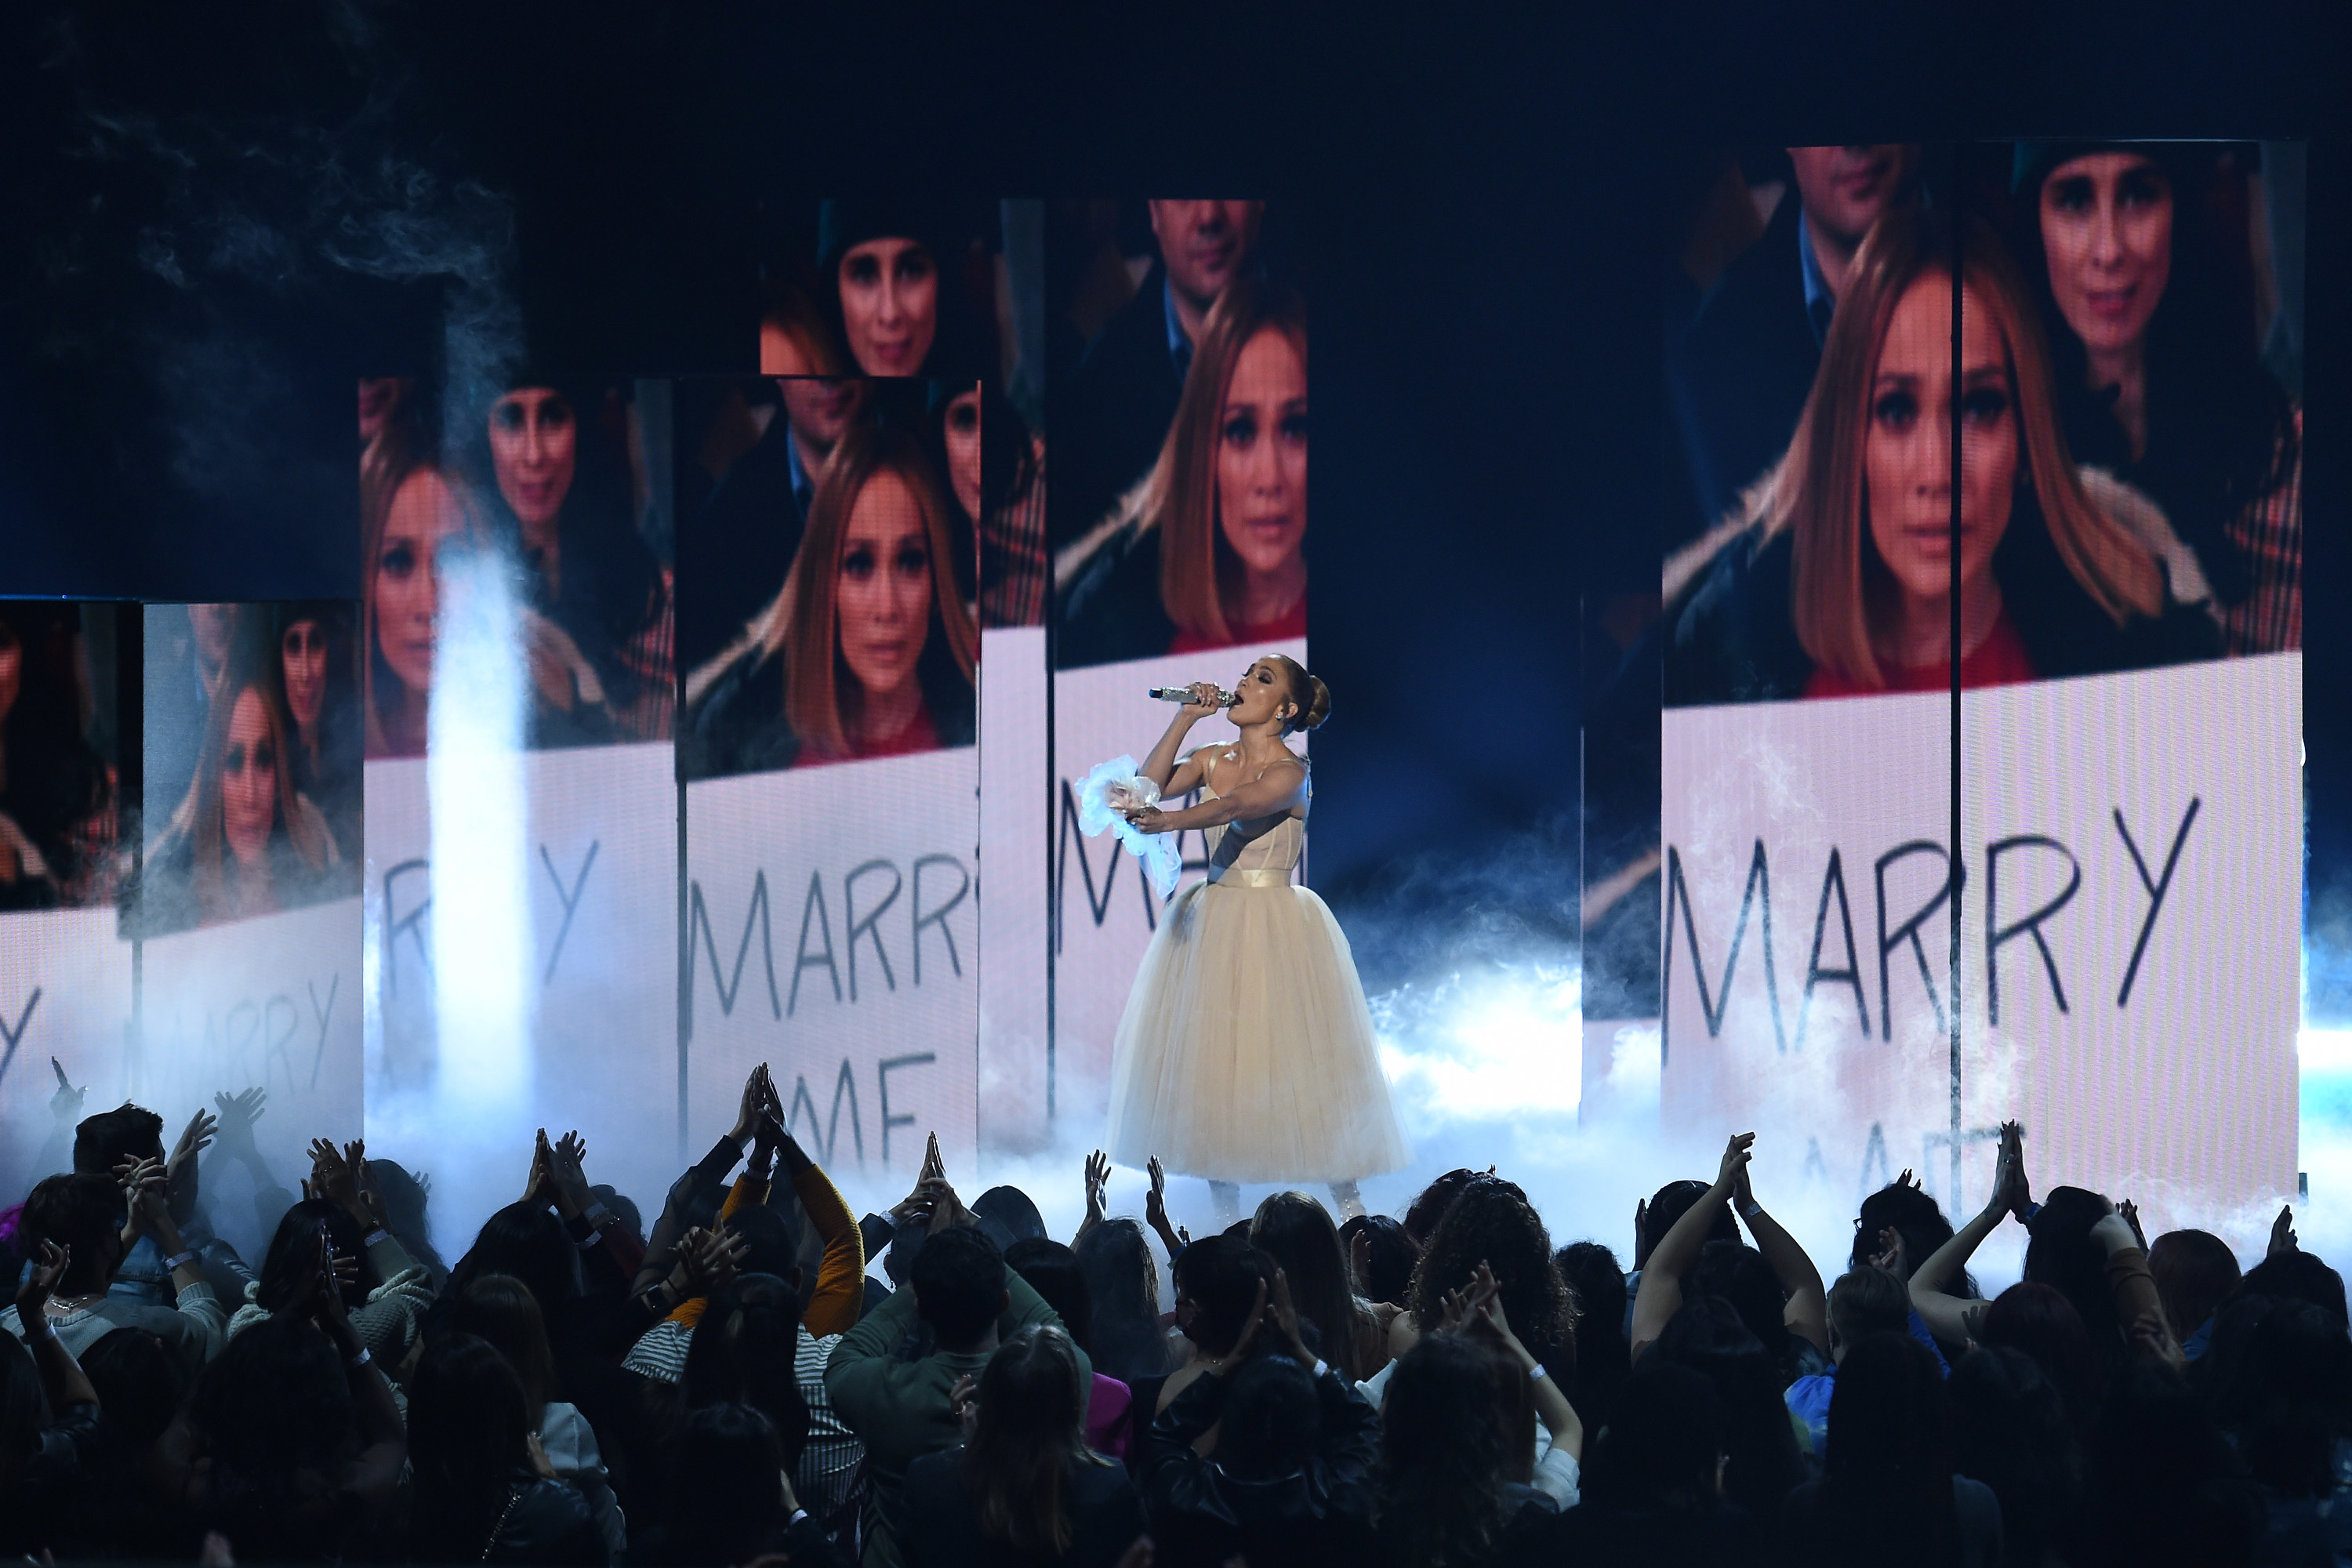 Jlo is performing in front of &quot;Marry me&quot; signs